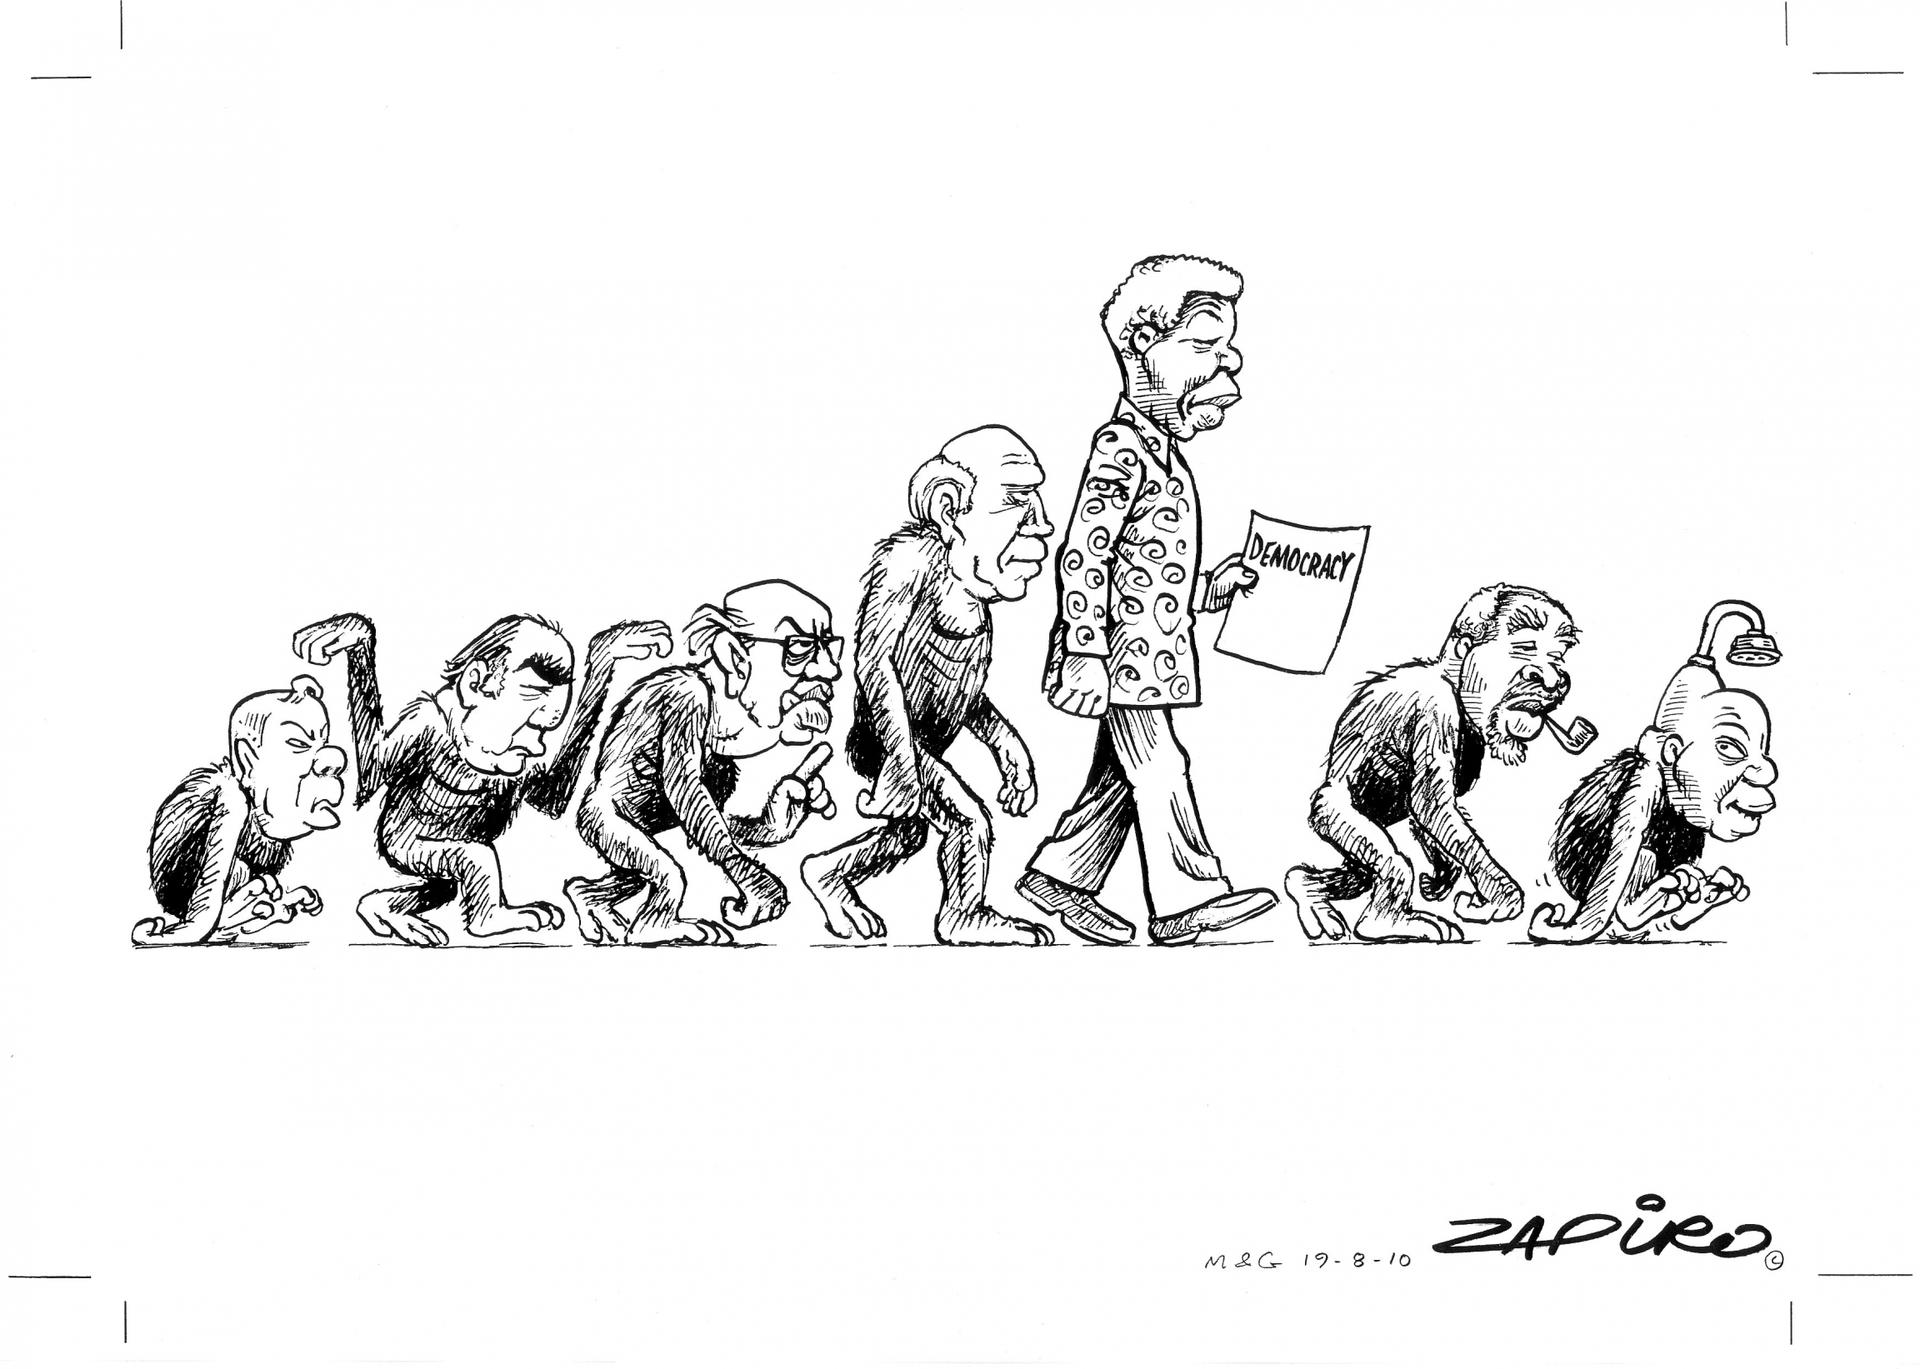 "Evolution of Democracy" in South Africa.